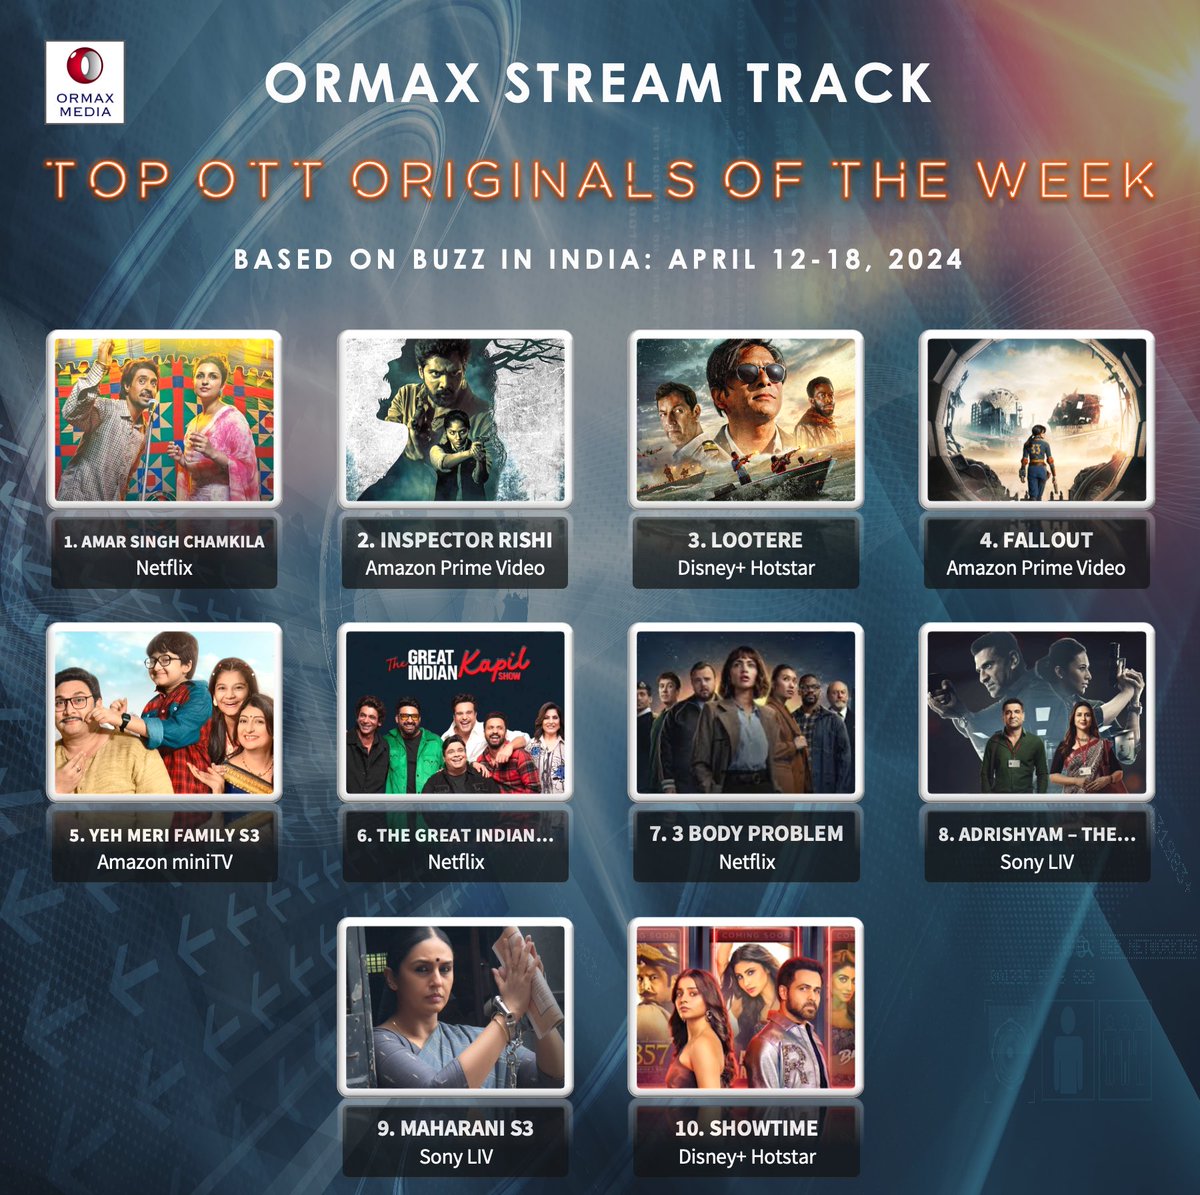 Ormax Stream Track: Top 10 OTT originals in India, including upcoming shows/ films, based on Buzz (Apr 12-18) #OrmaxStreamTrack #OTT